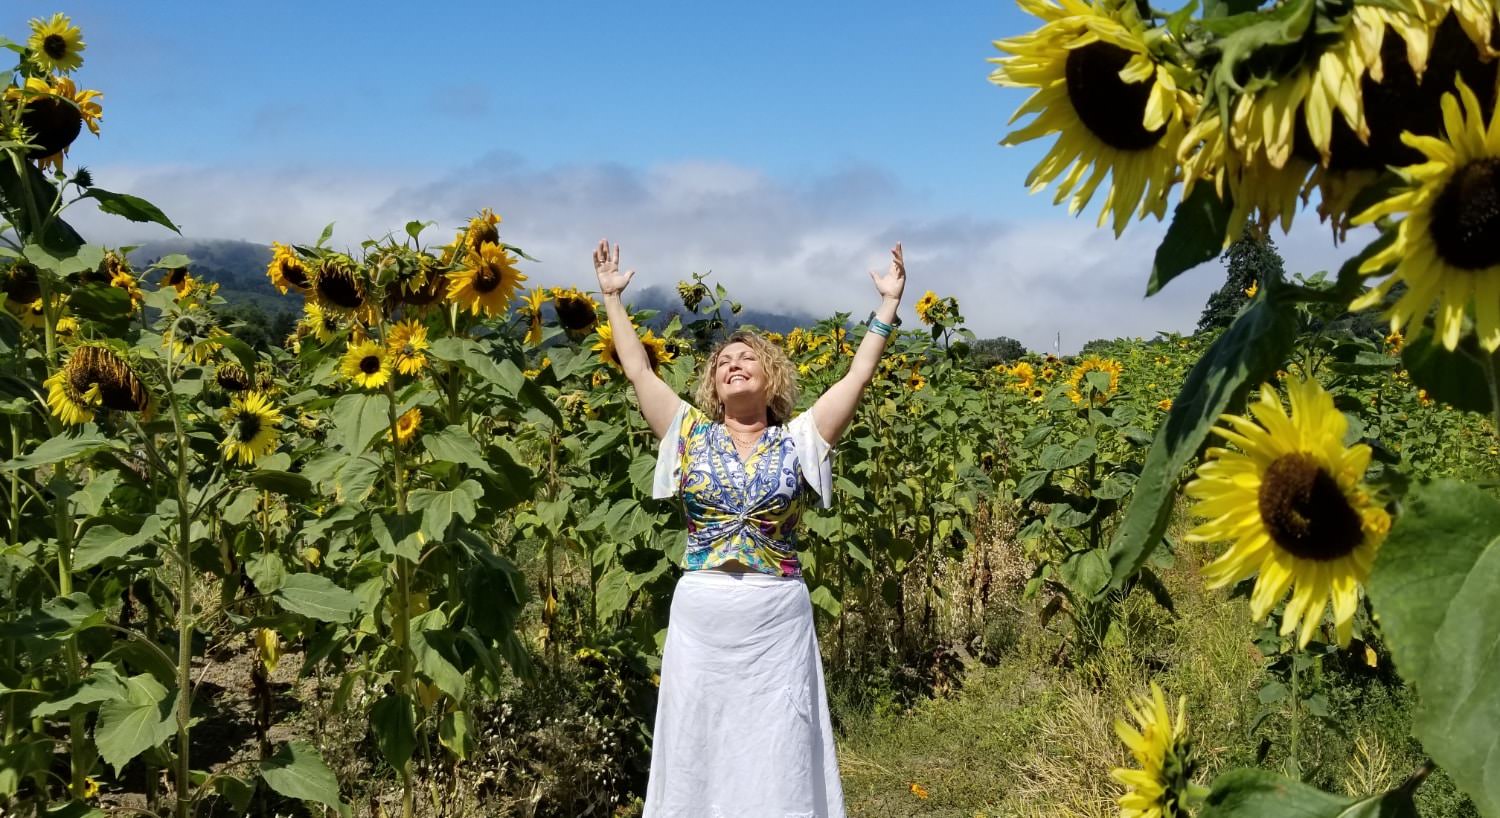 Woman with arms raised up and smiling in the sunshine in a field of large sunflowers